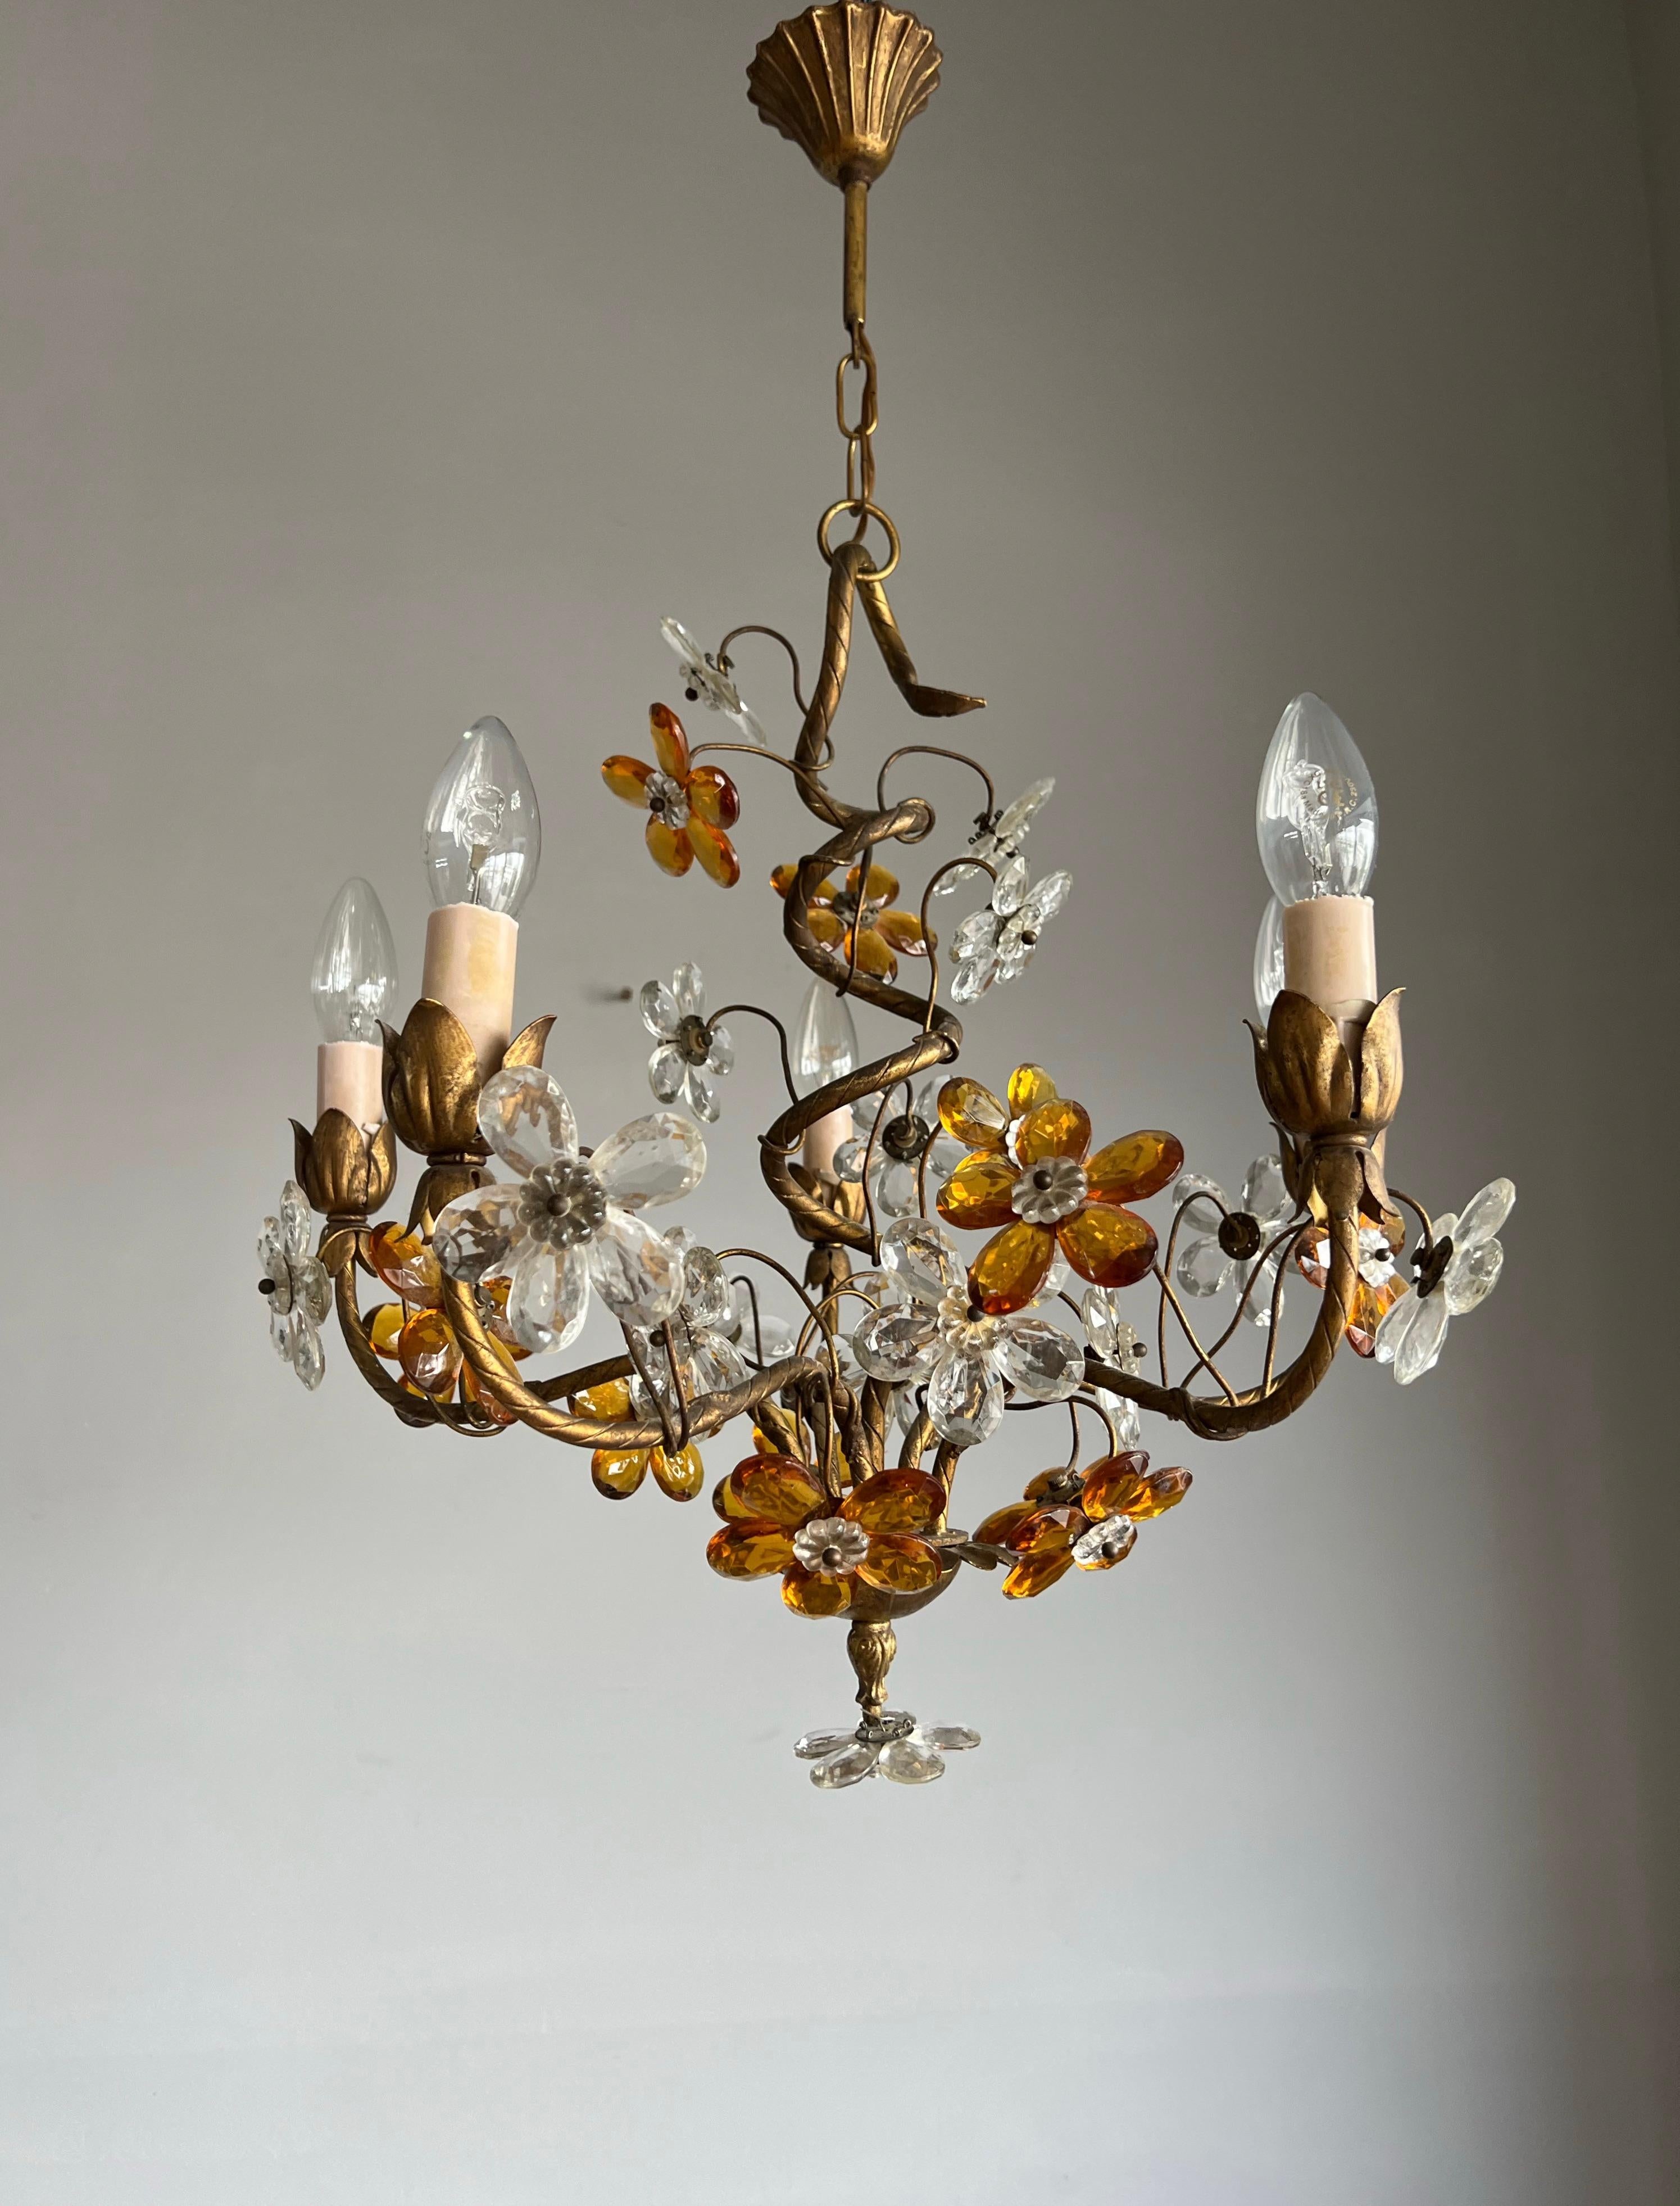 Stunning design, hand-crafted in Italy, modern art glass pendant light with glass flowers.

This incredibly well designed and beautifully executed chandelier is in mint condition. This quality made and finely hand-crafted gilt metal and mouth blown